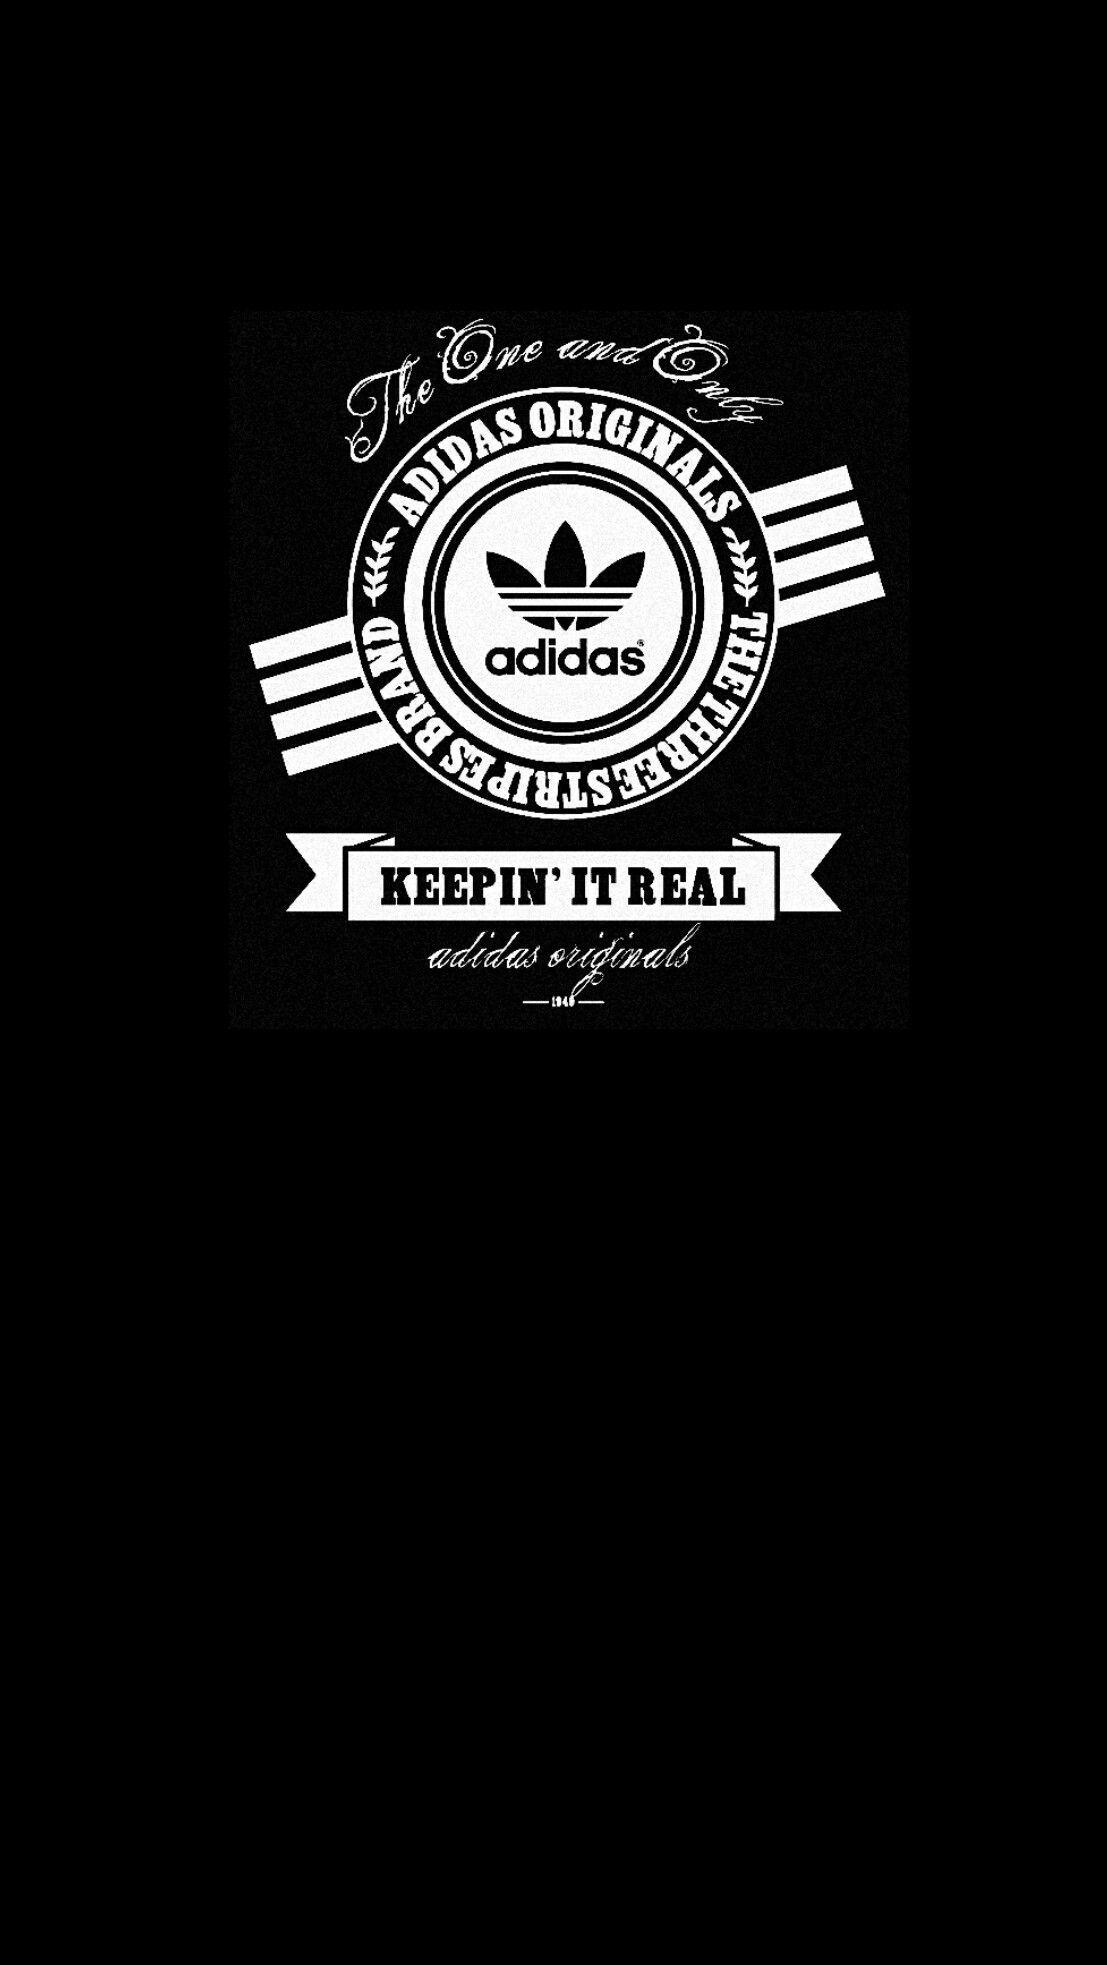 Camo Adidas Logo - adidas #camouflage #wallpaper #iPhone #android. Adidas in 2019